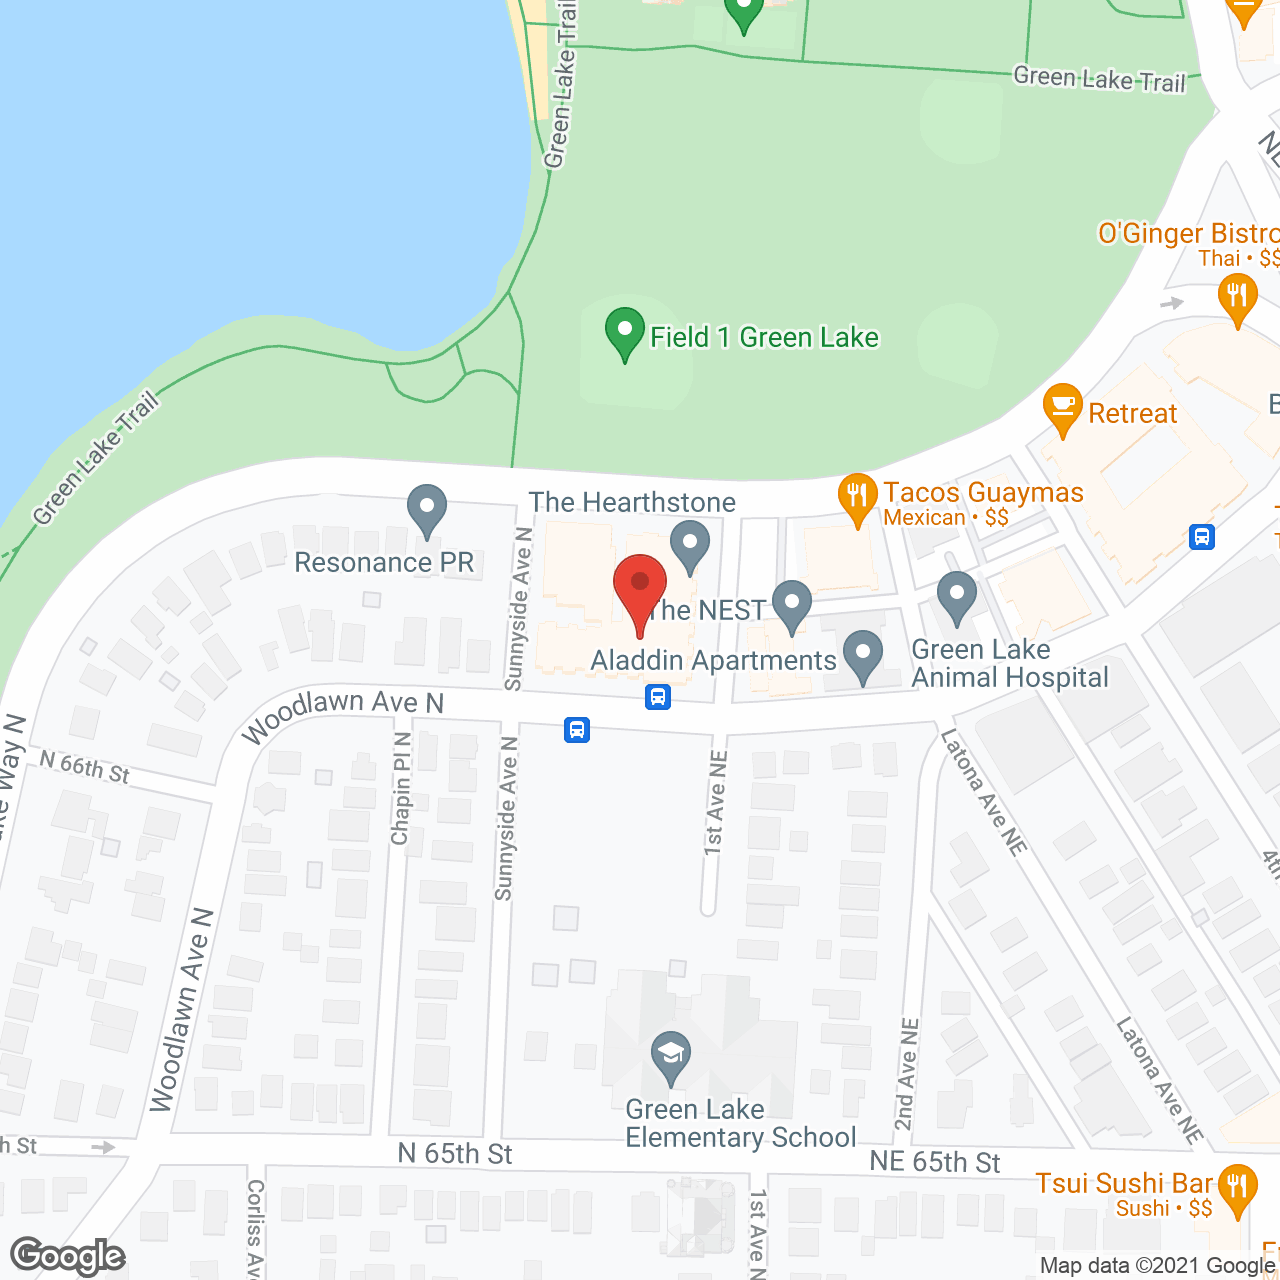 The Hearthstone in google map